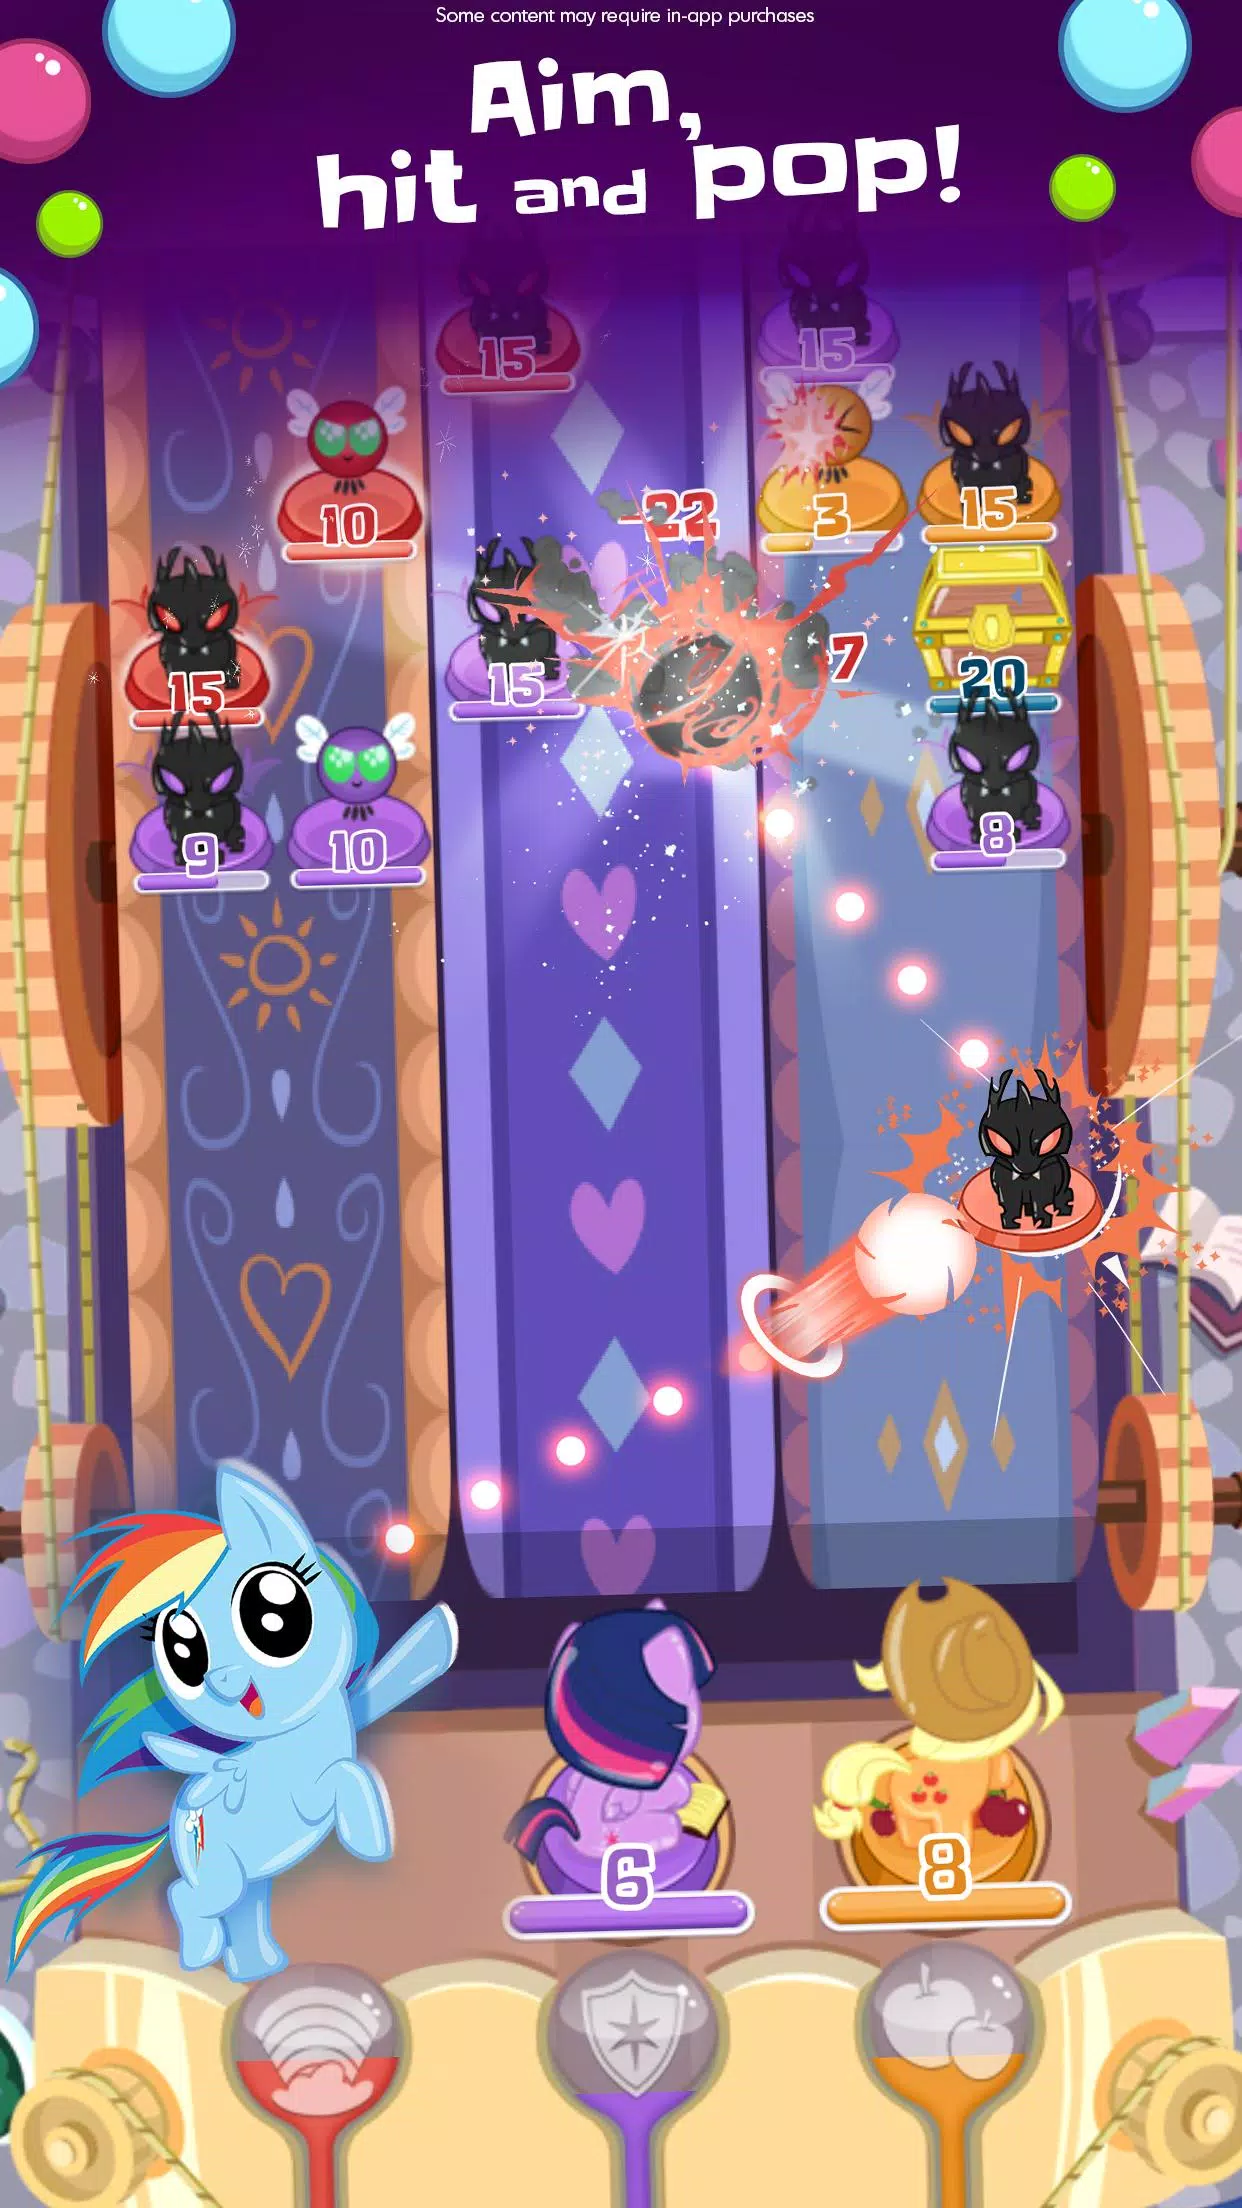 Tải Xuống Apk My Little Pony Pocket Ponies Cho Android